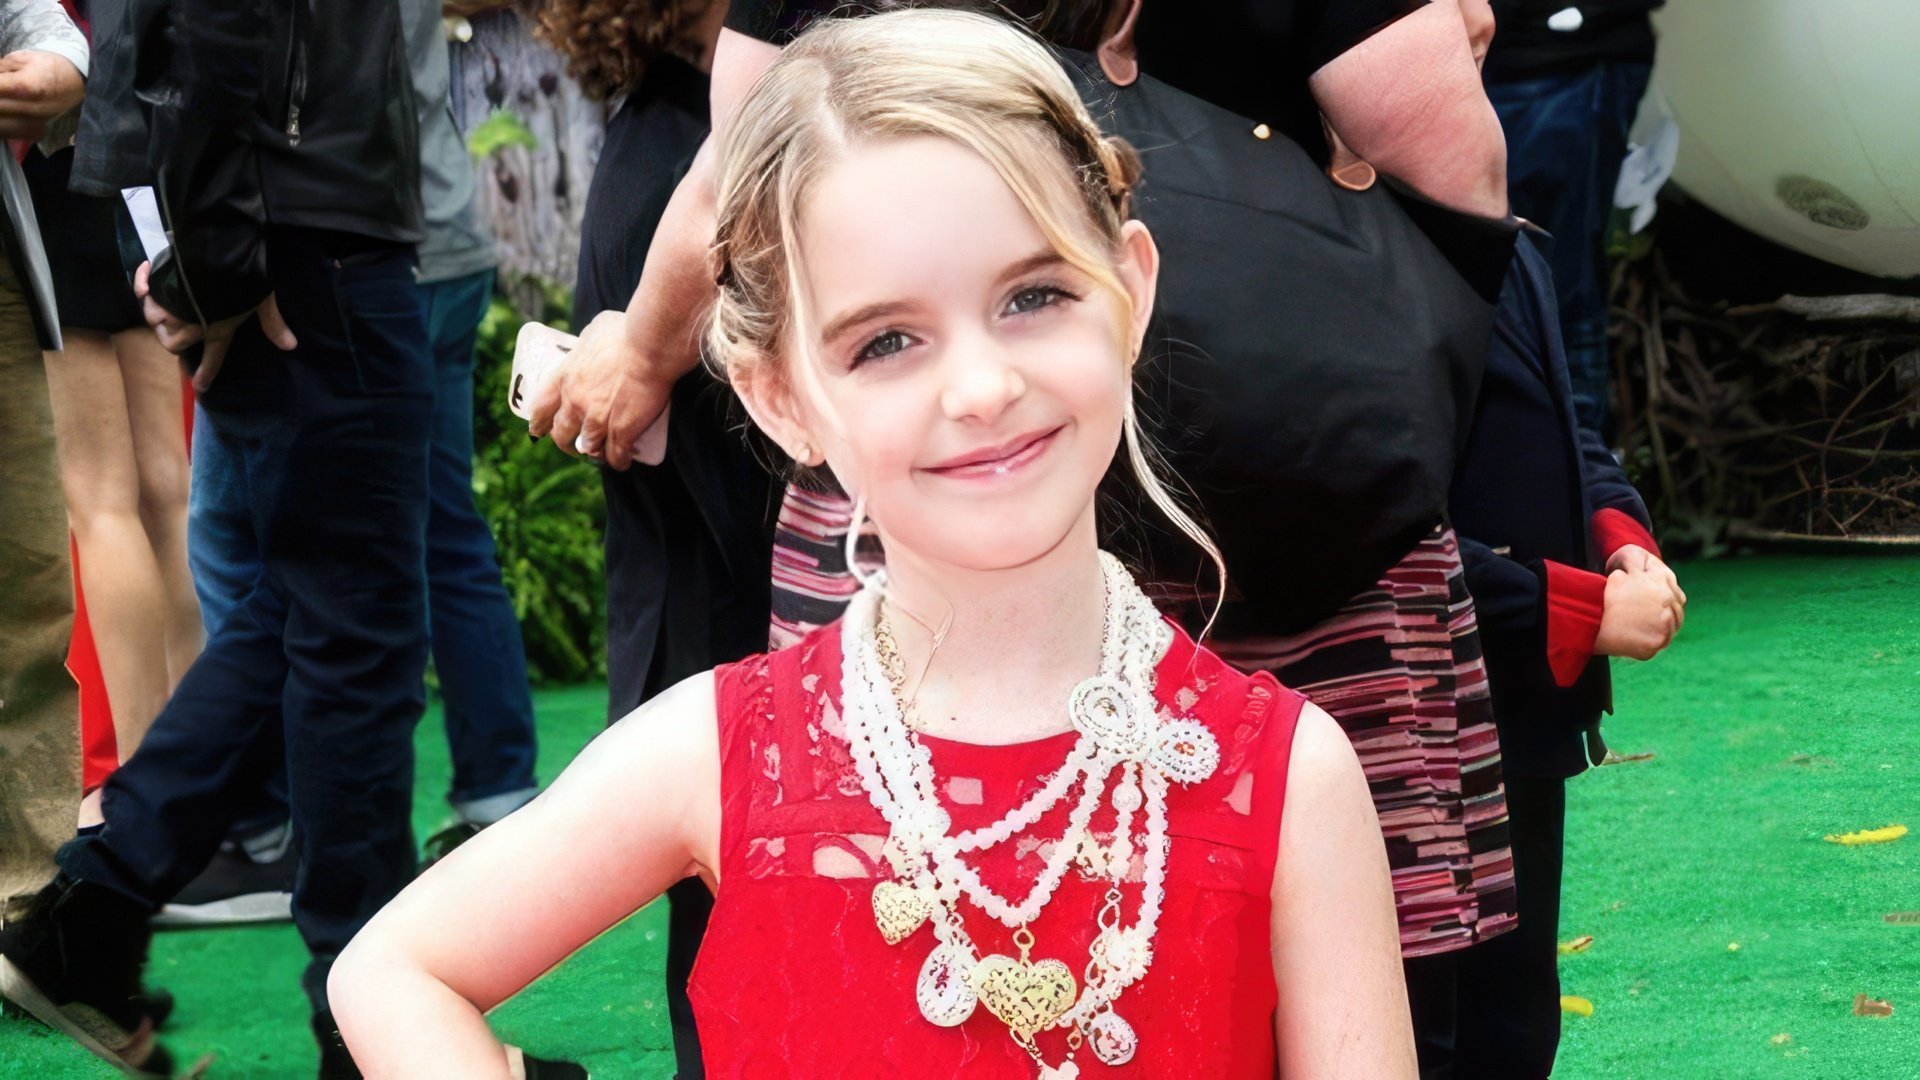 Mckenna Grace has already received her first awards and popularity